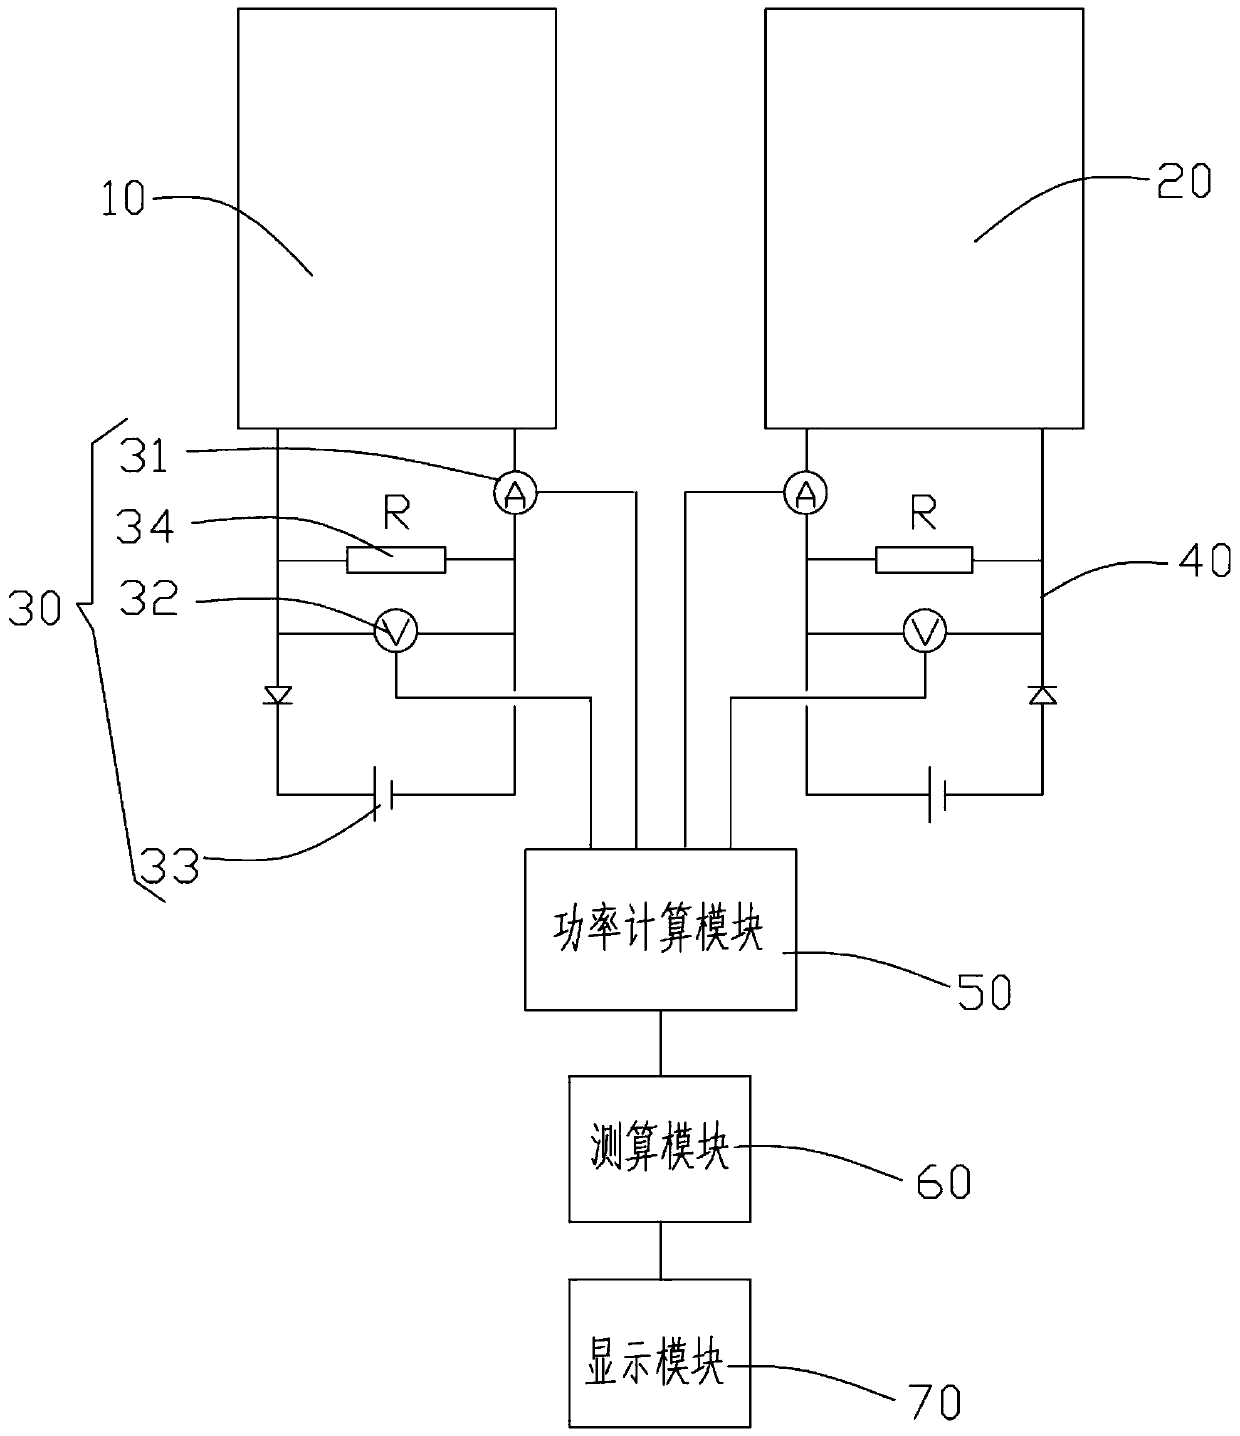 Component cleanliness monitoring device and monitoring method